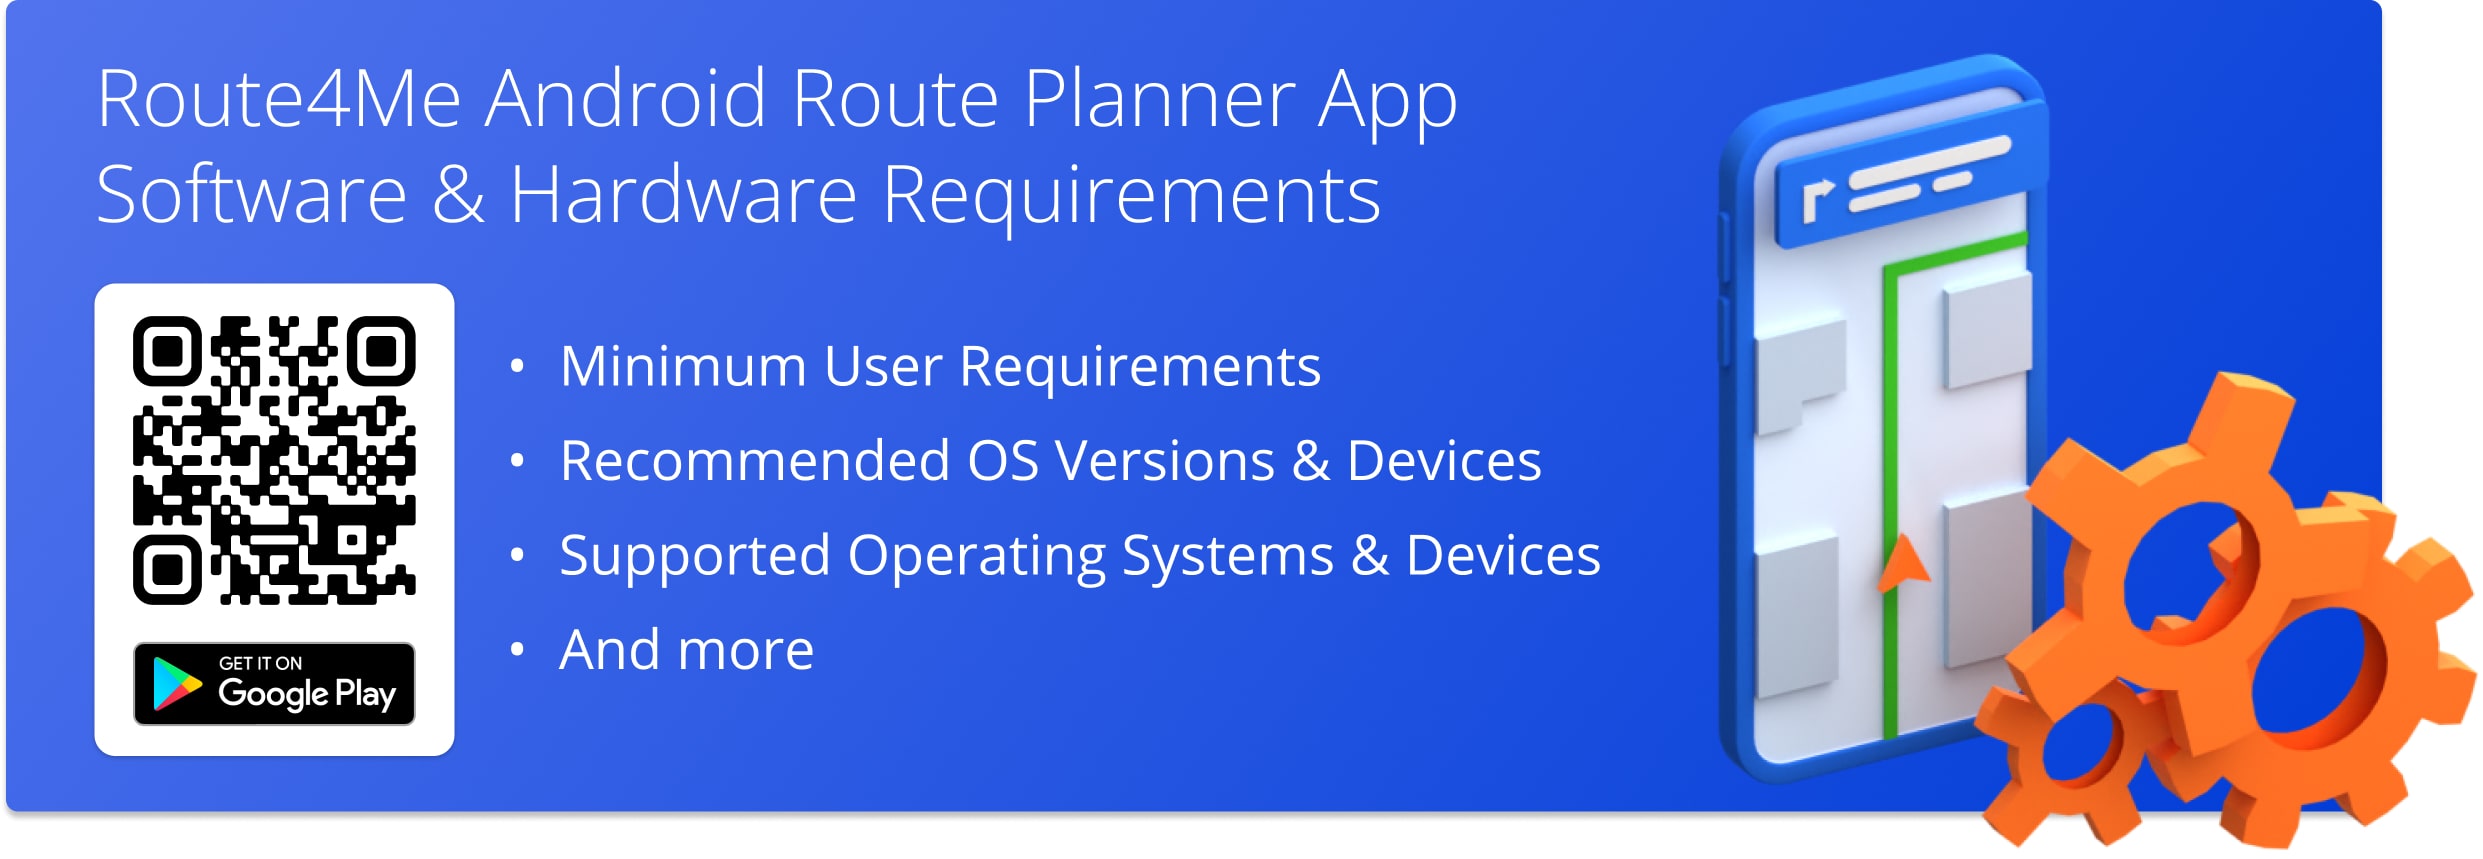 Software and hardware requirements for Route4Me's Android Route Planner app for drivers.